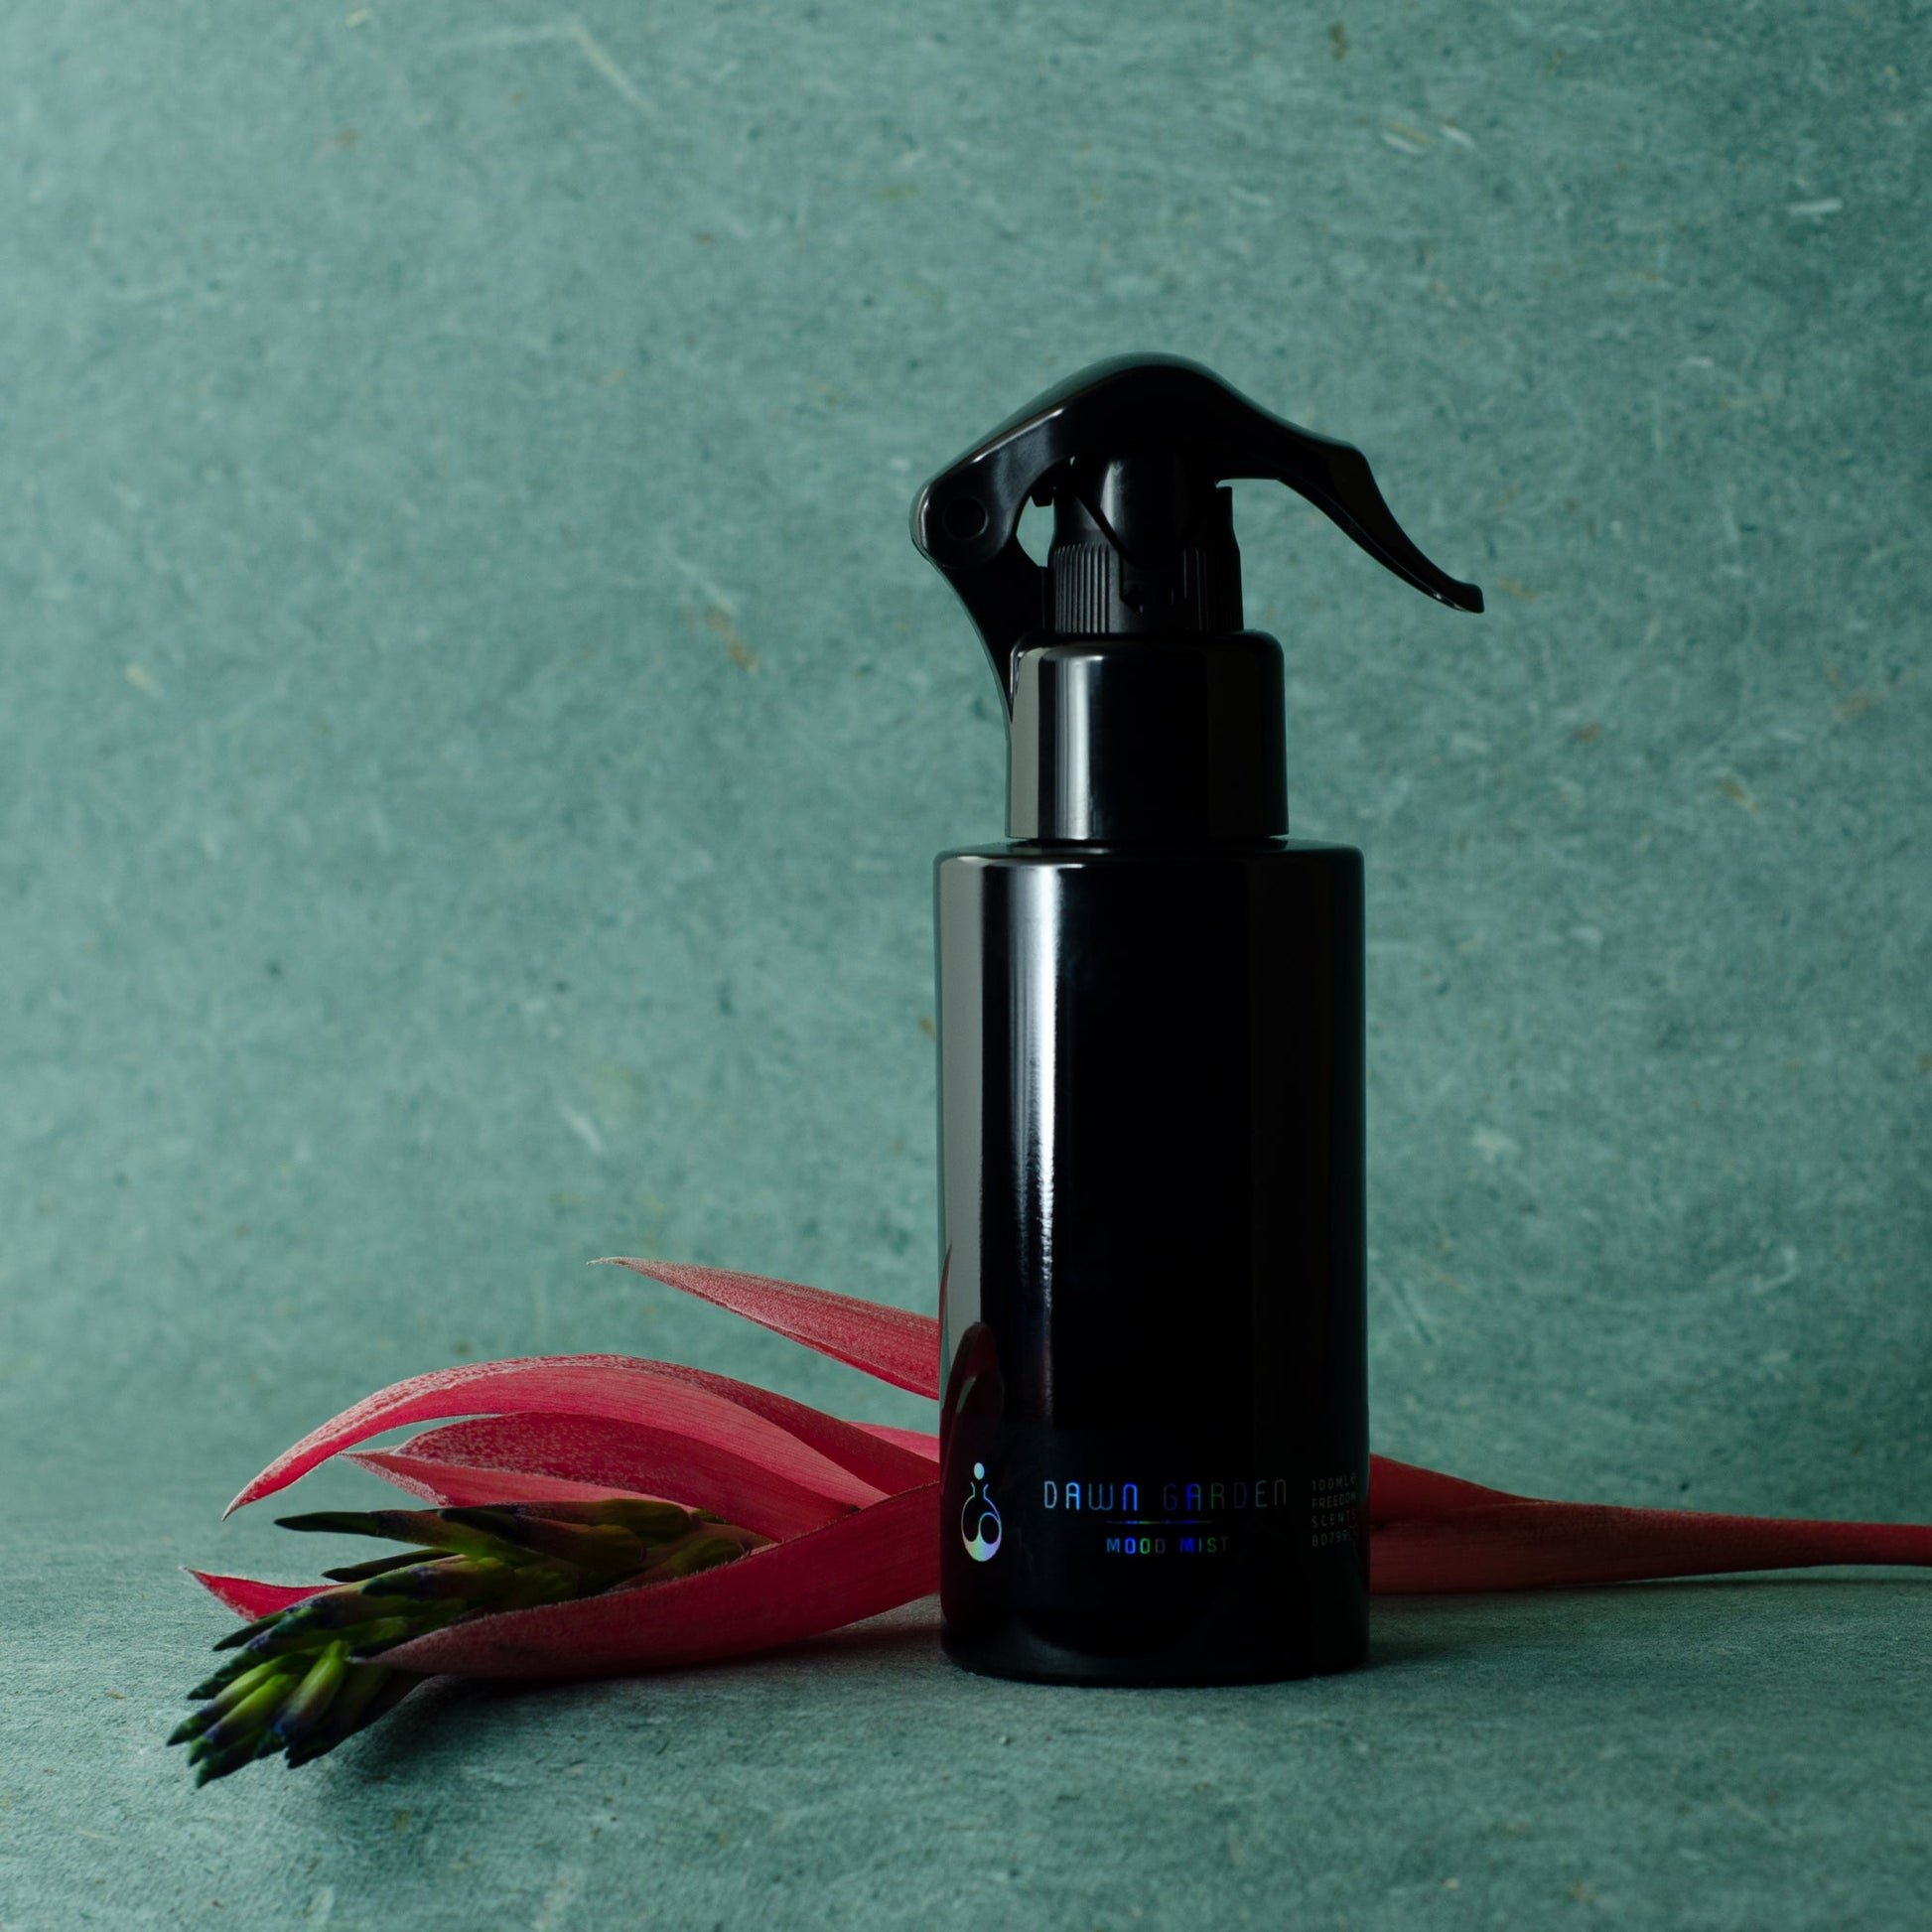 home fragrance in a black spray bottle on a teal background with tropical flower next to the bottle. freedom scents hand made natural home mists